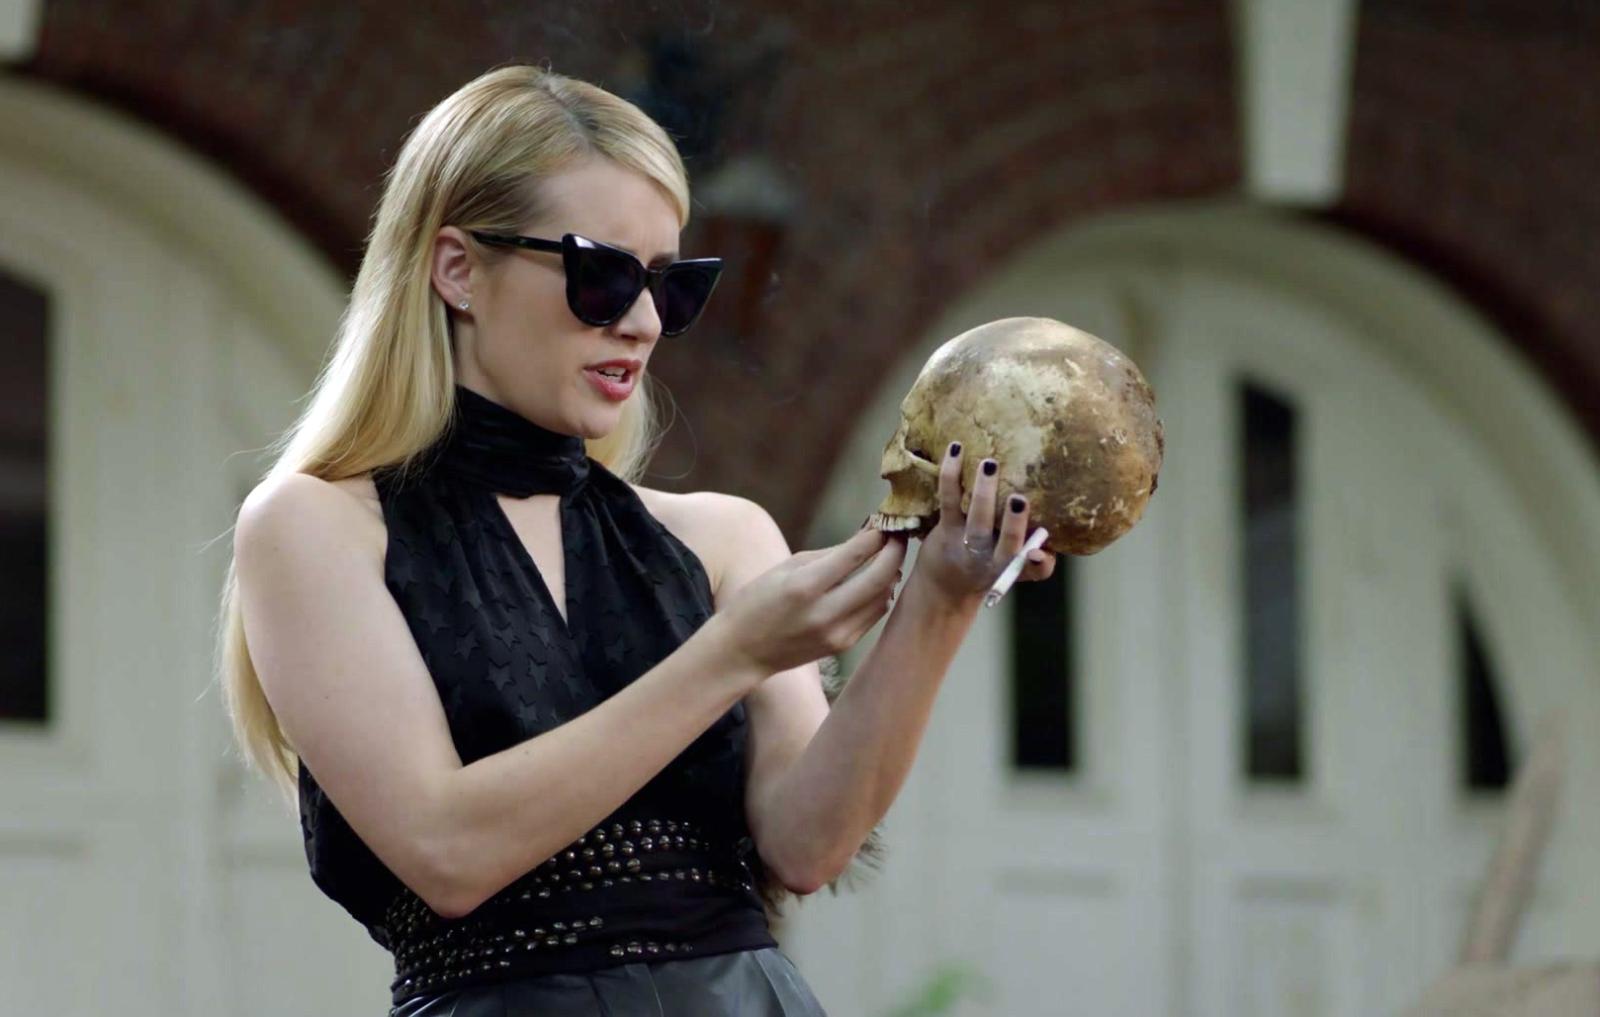 5 Most Brilliant American Horror Story Episodes With Best IMDb Scores to Rewatch Before S12 - image 5